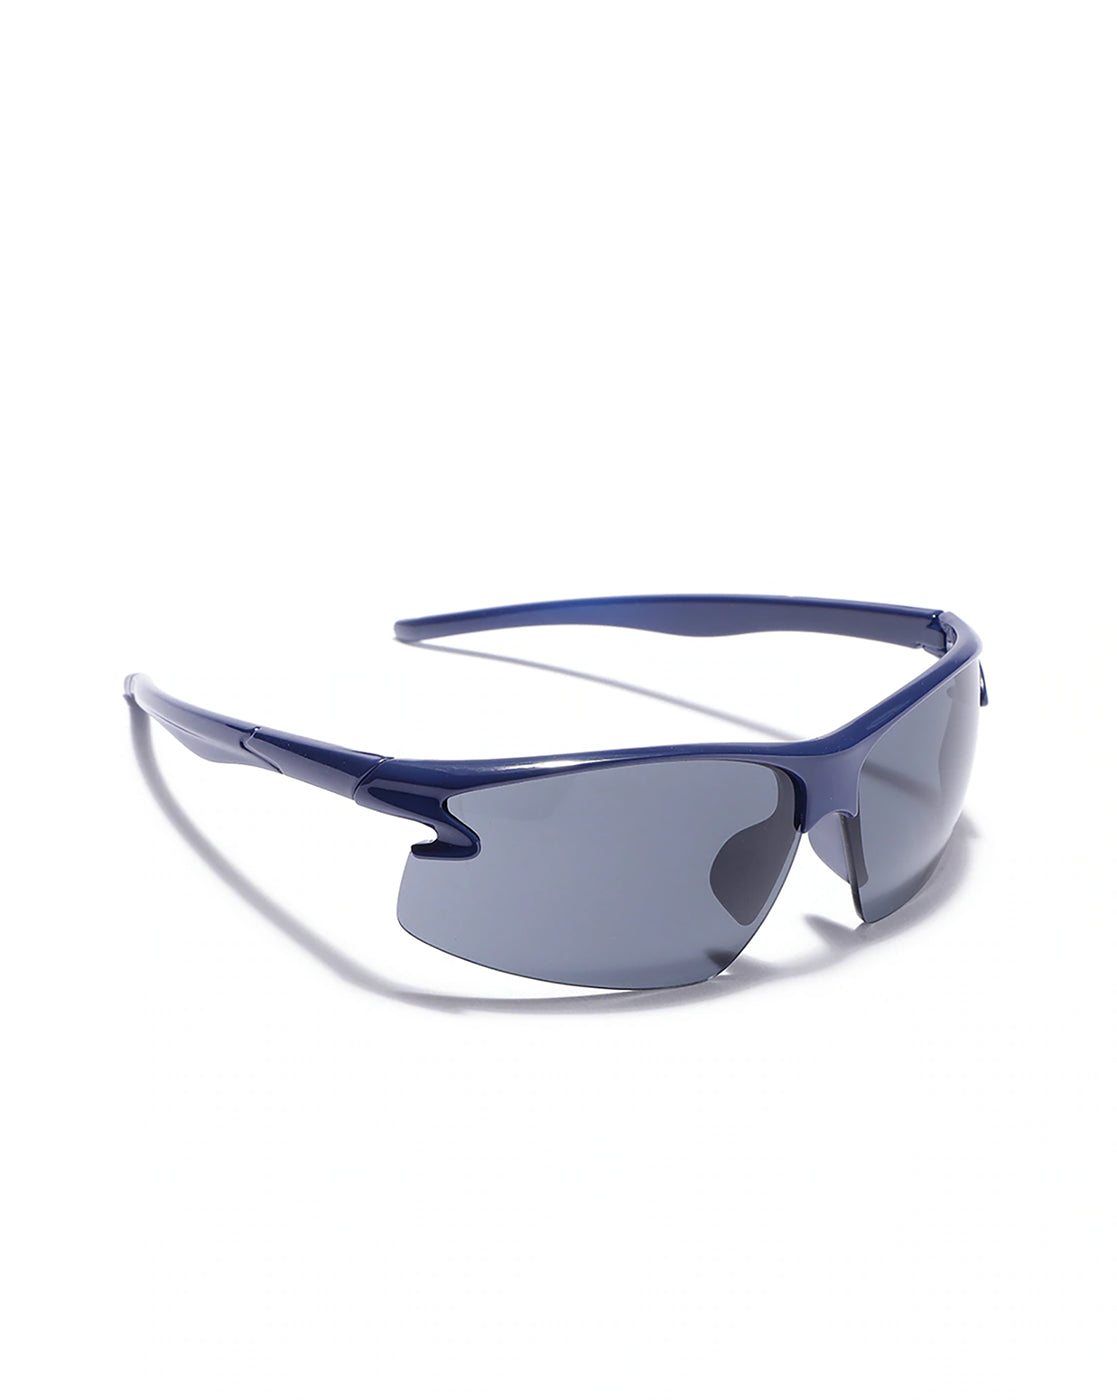 Carlton London Sports Sunglasses With Uv Protected Lens For Men